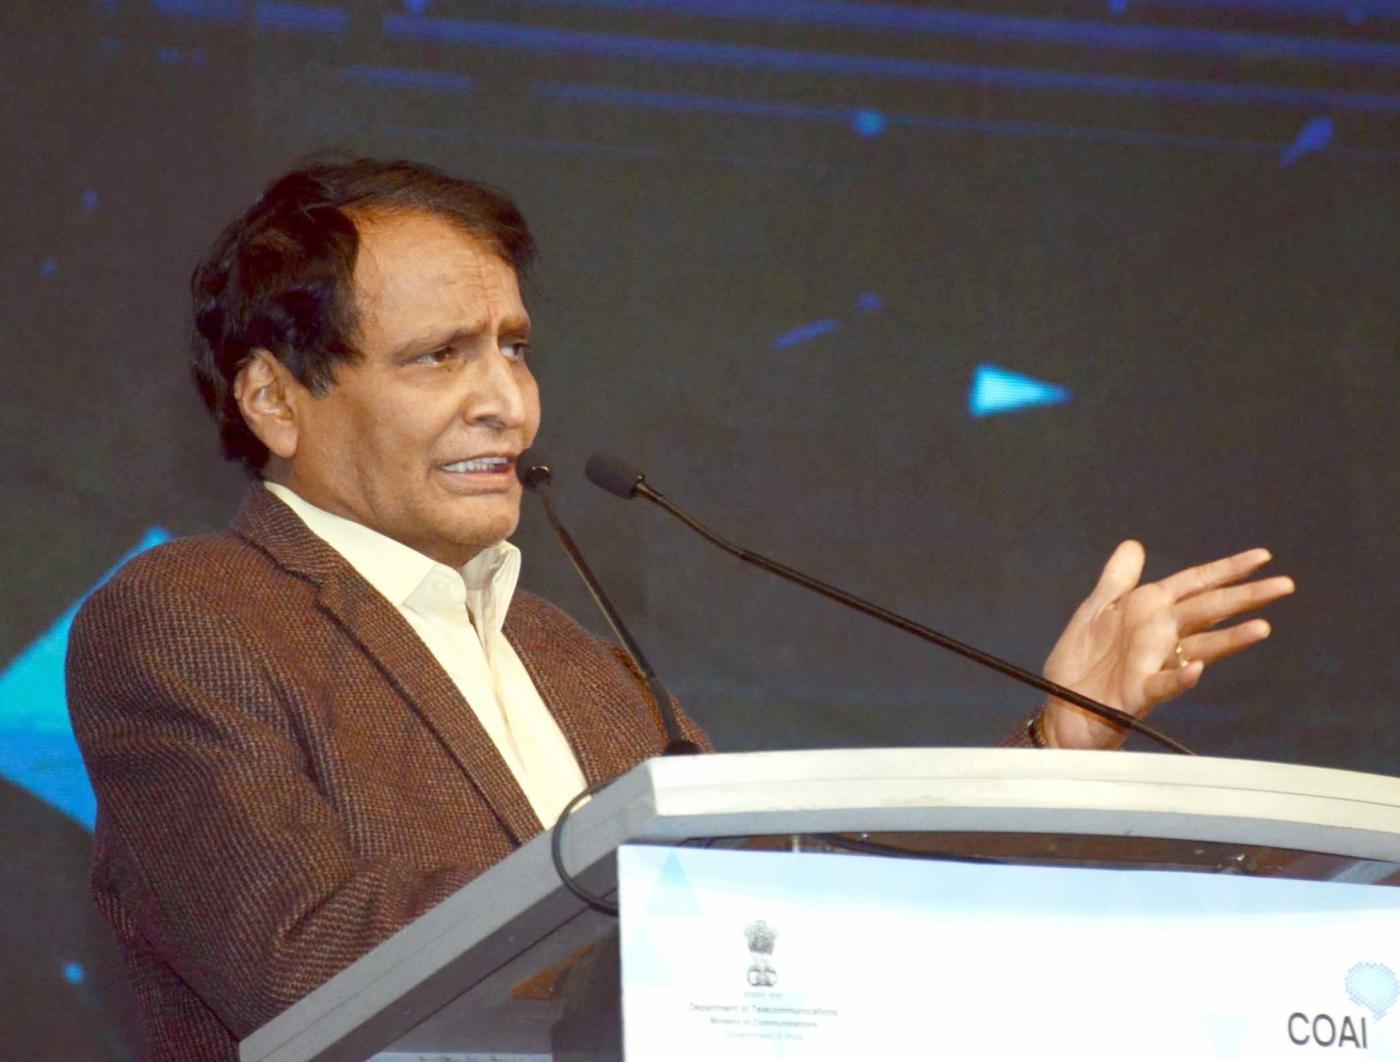 New Delhi: Union Minister for Commerce & Industry and Civil Aviation Suresh Prabhu addresses at the India Mobile Congress - 2018, in New Delhi on Oct 25, 2018. (Photo: IANS/PIB) by .